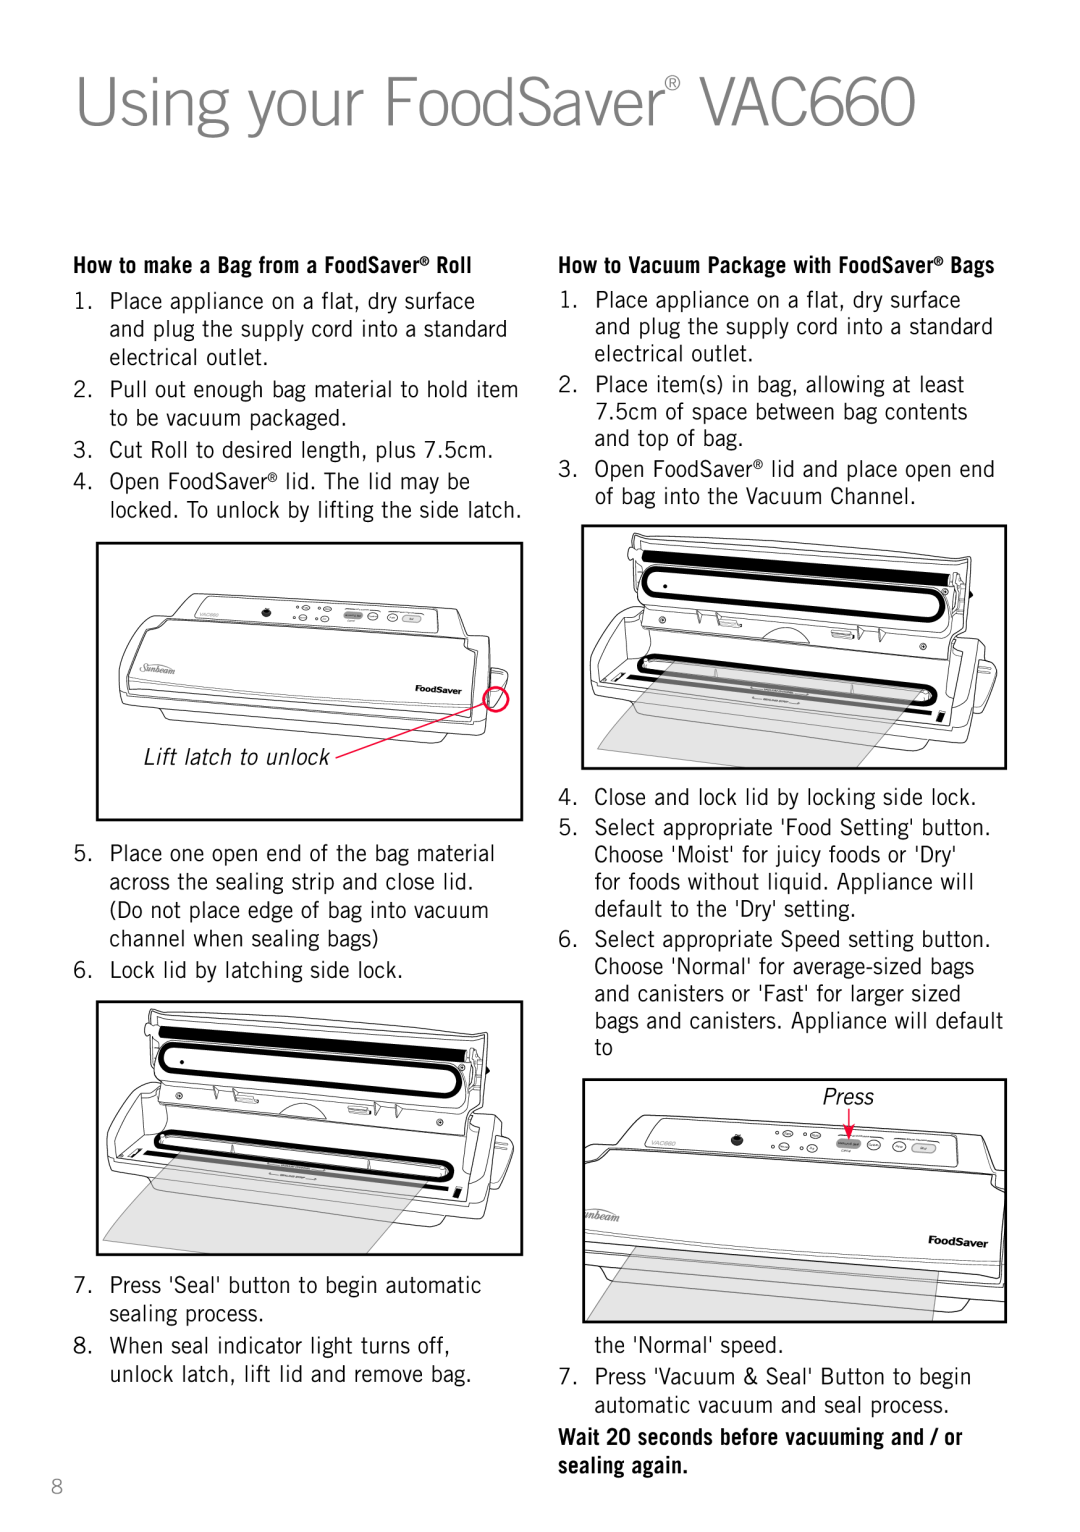 Sunbeam Using your FoodSaver VAC660, How to make a Bag from a FoodSaver Roll, How to Vacuum Package with FoodSaver Bags 